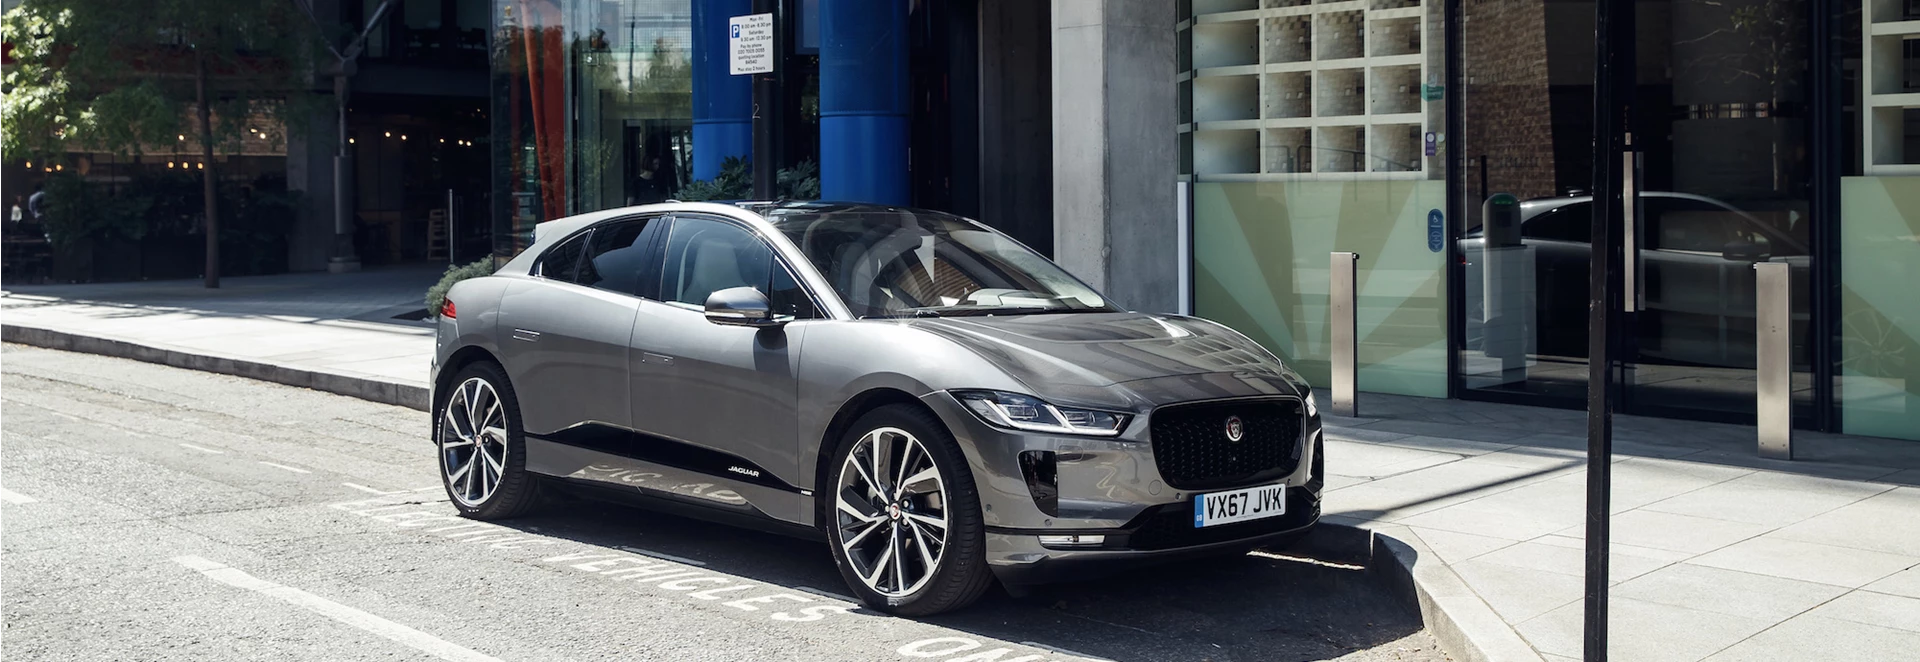 Jaguar I-Pace scoops top gong at Professional Driver awards